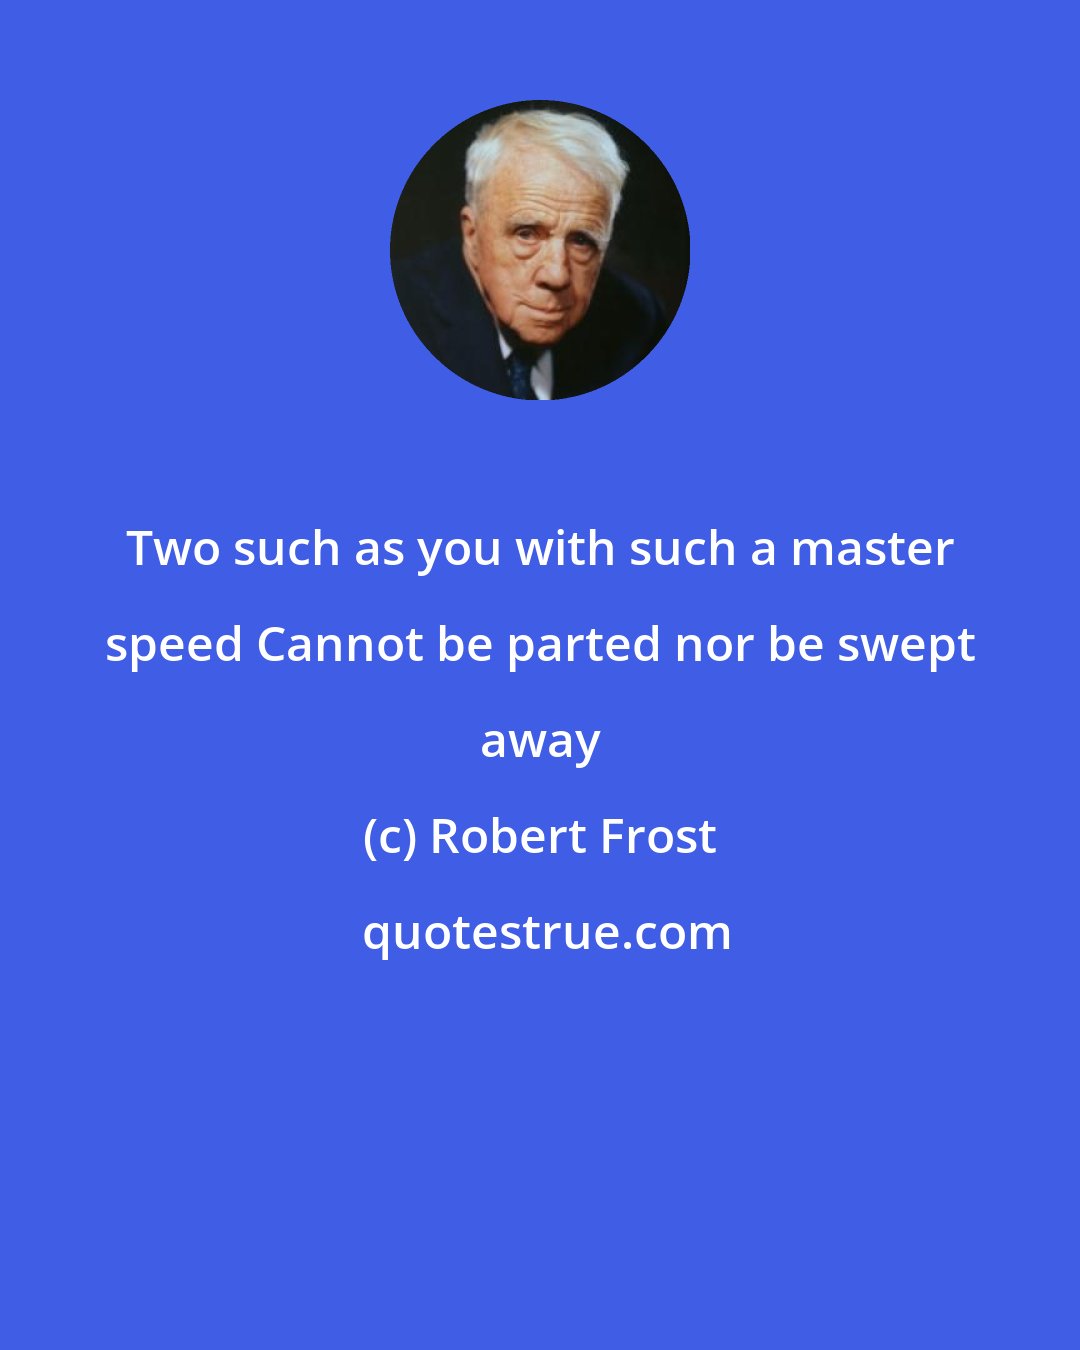 Robert Frost: Two such as you with such a master speed Cannot be parted nor be swept away